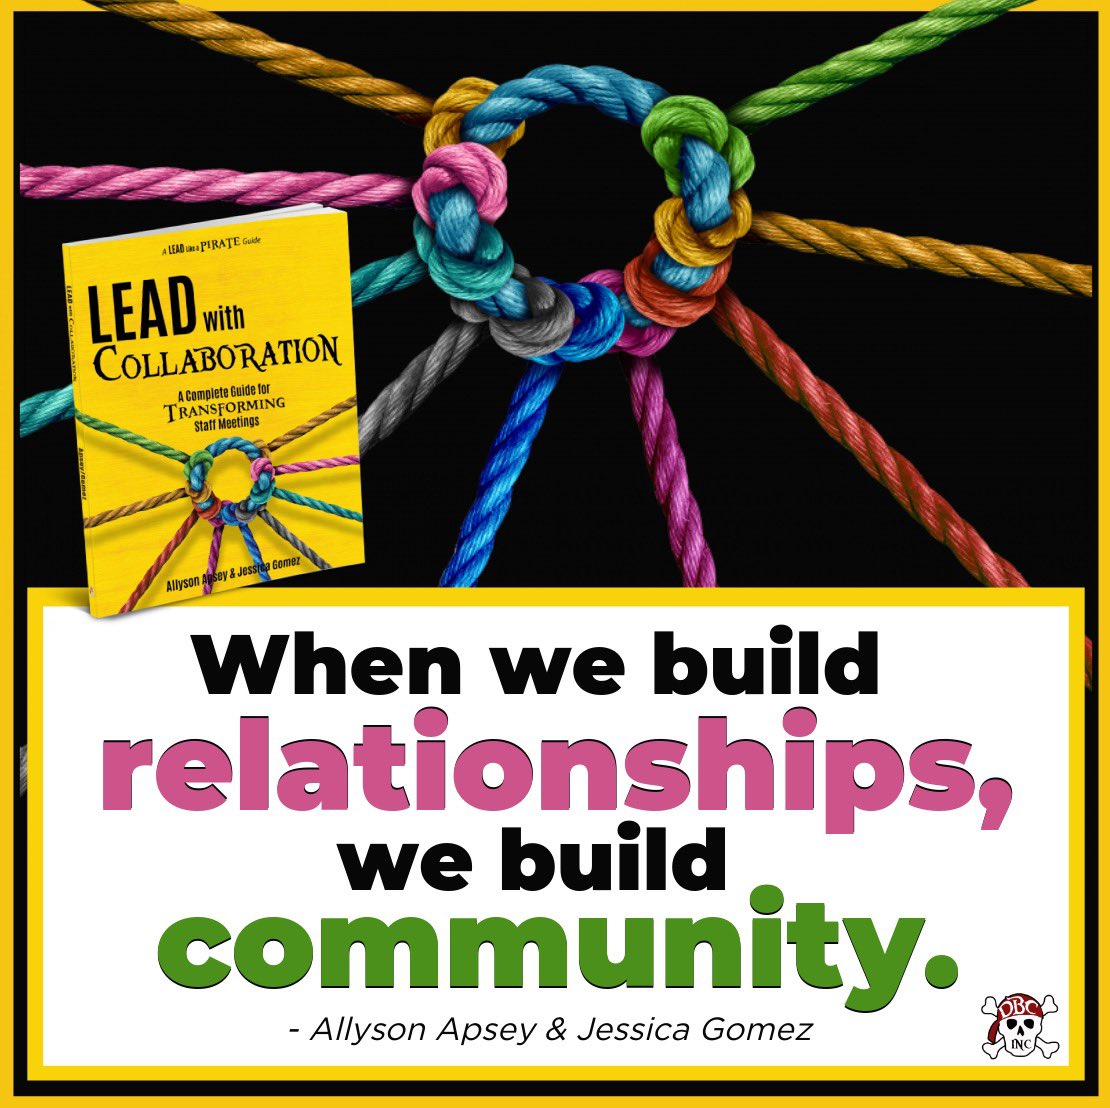 'When we build relationships, we build community.' 
- @AllysonApsey & @mrsjessgomez in #LeadWithCollaboration

Great summer read to ramp up the effectiveness of your meetings & collab time this coming year. 
a.co/d/iSsuE5s
#dbcincbooks #LeadLAP #tlap 
LOVE that cover!